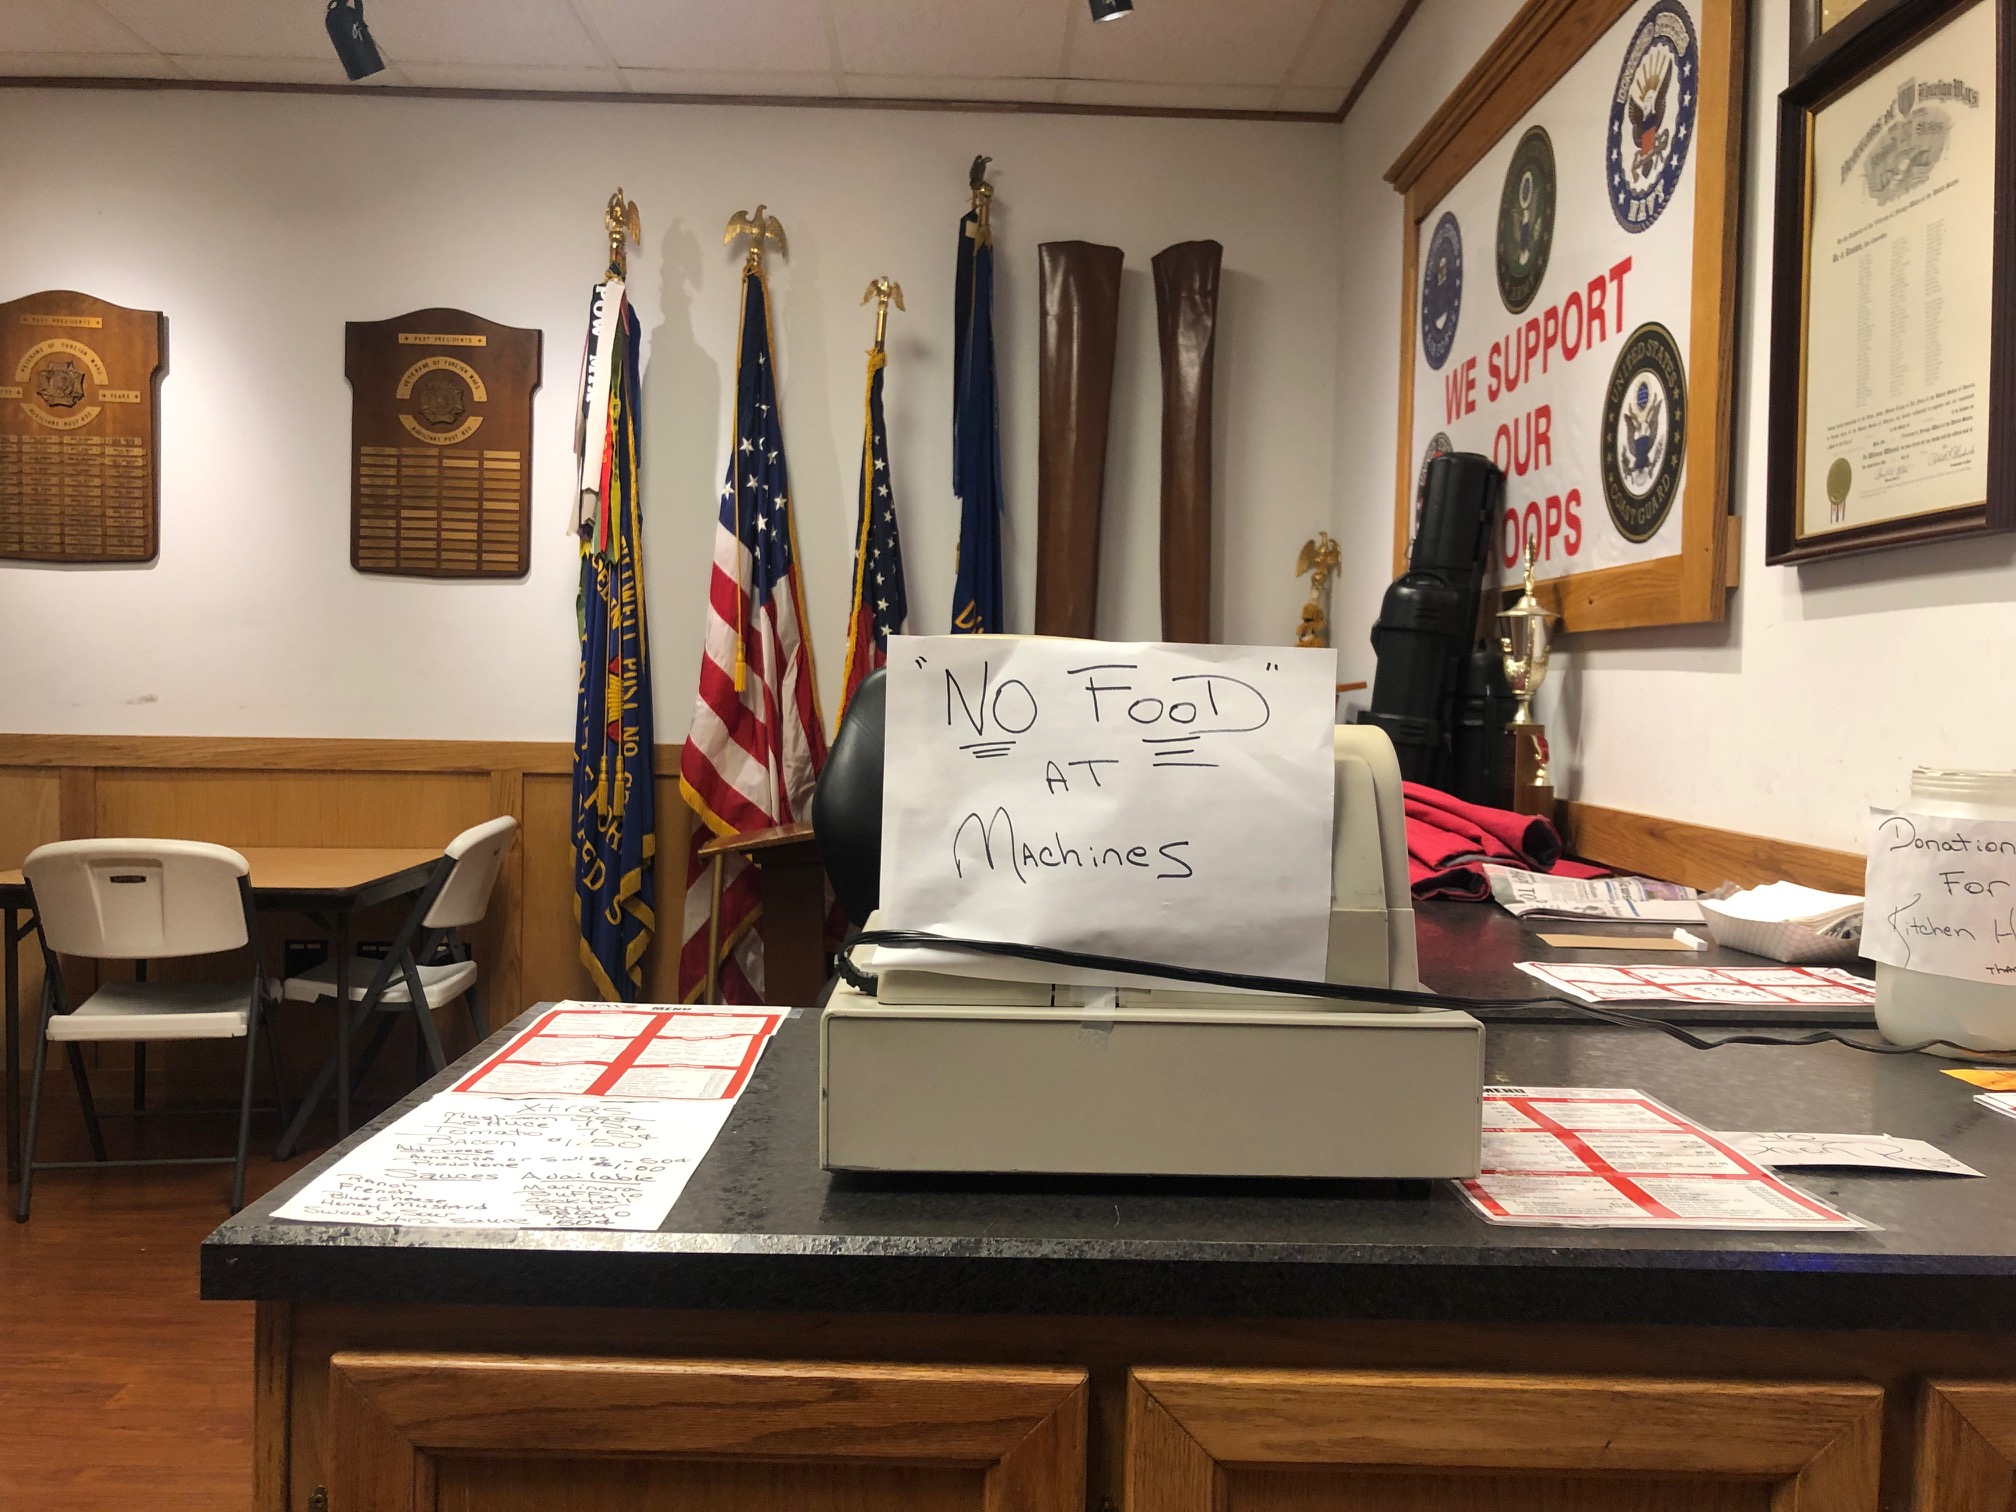 On a wooden bar, there is a cash register with a white piece of paper. The paper has a handwritten note: No Food at the Machines. Photo by Alyssa Buckley.